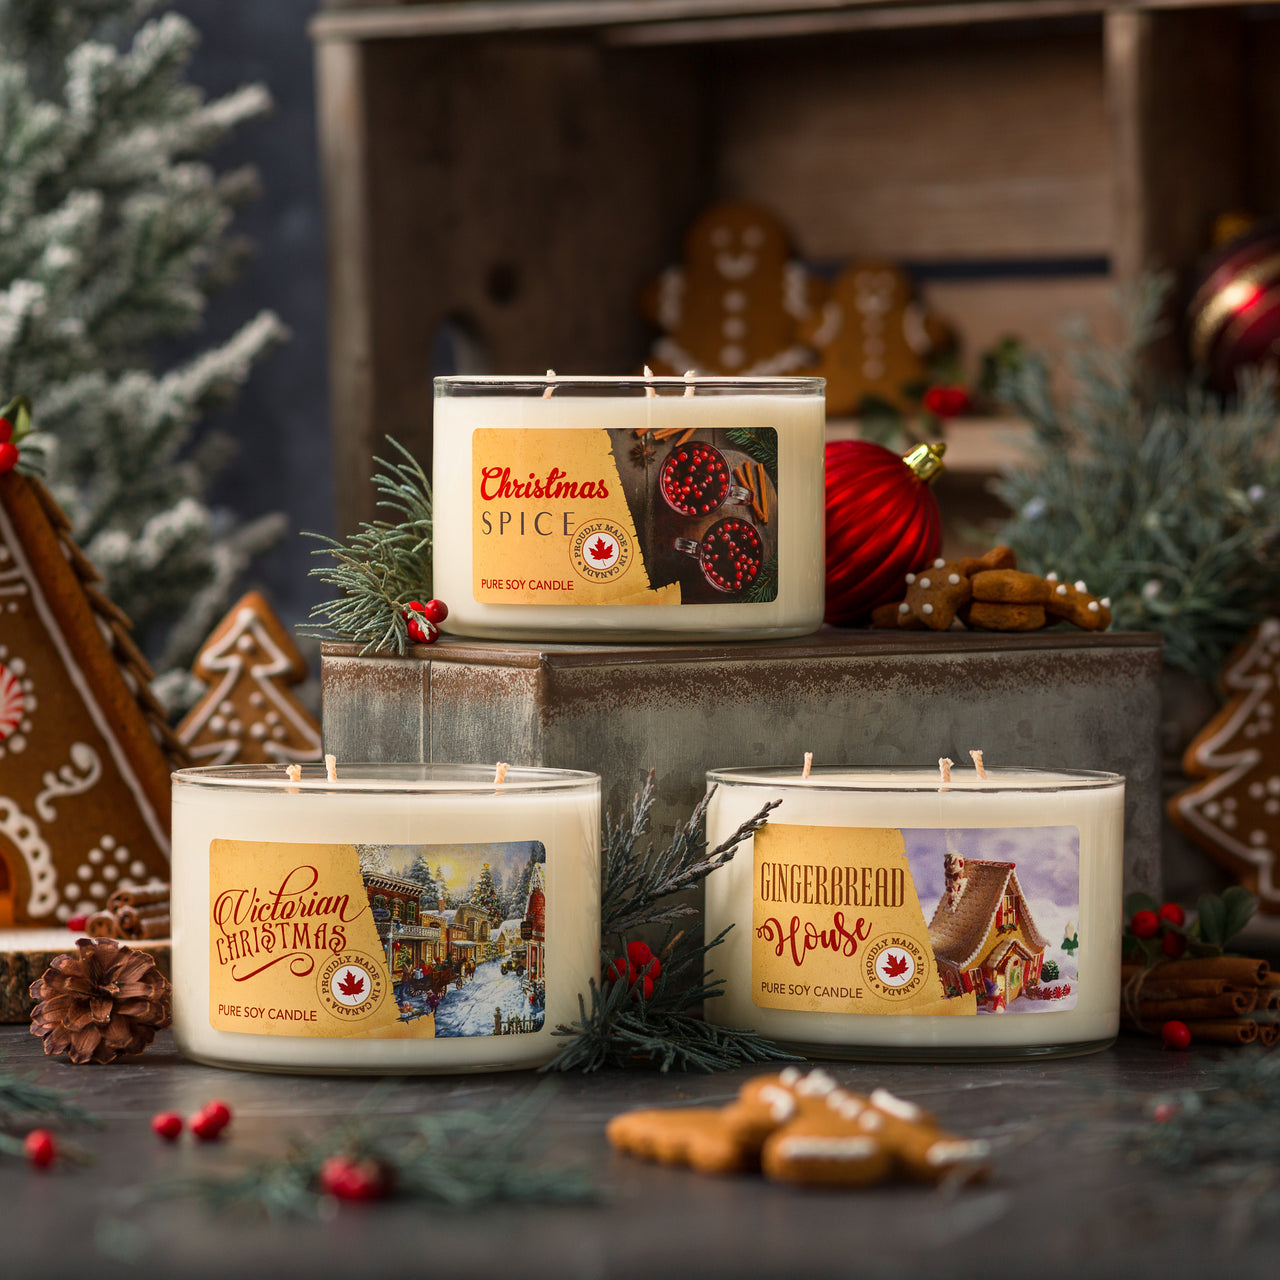 Gingerbread House - 3 wick